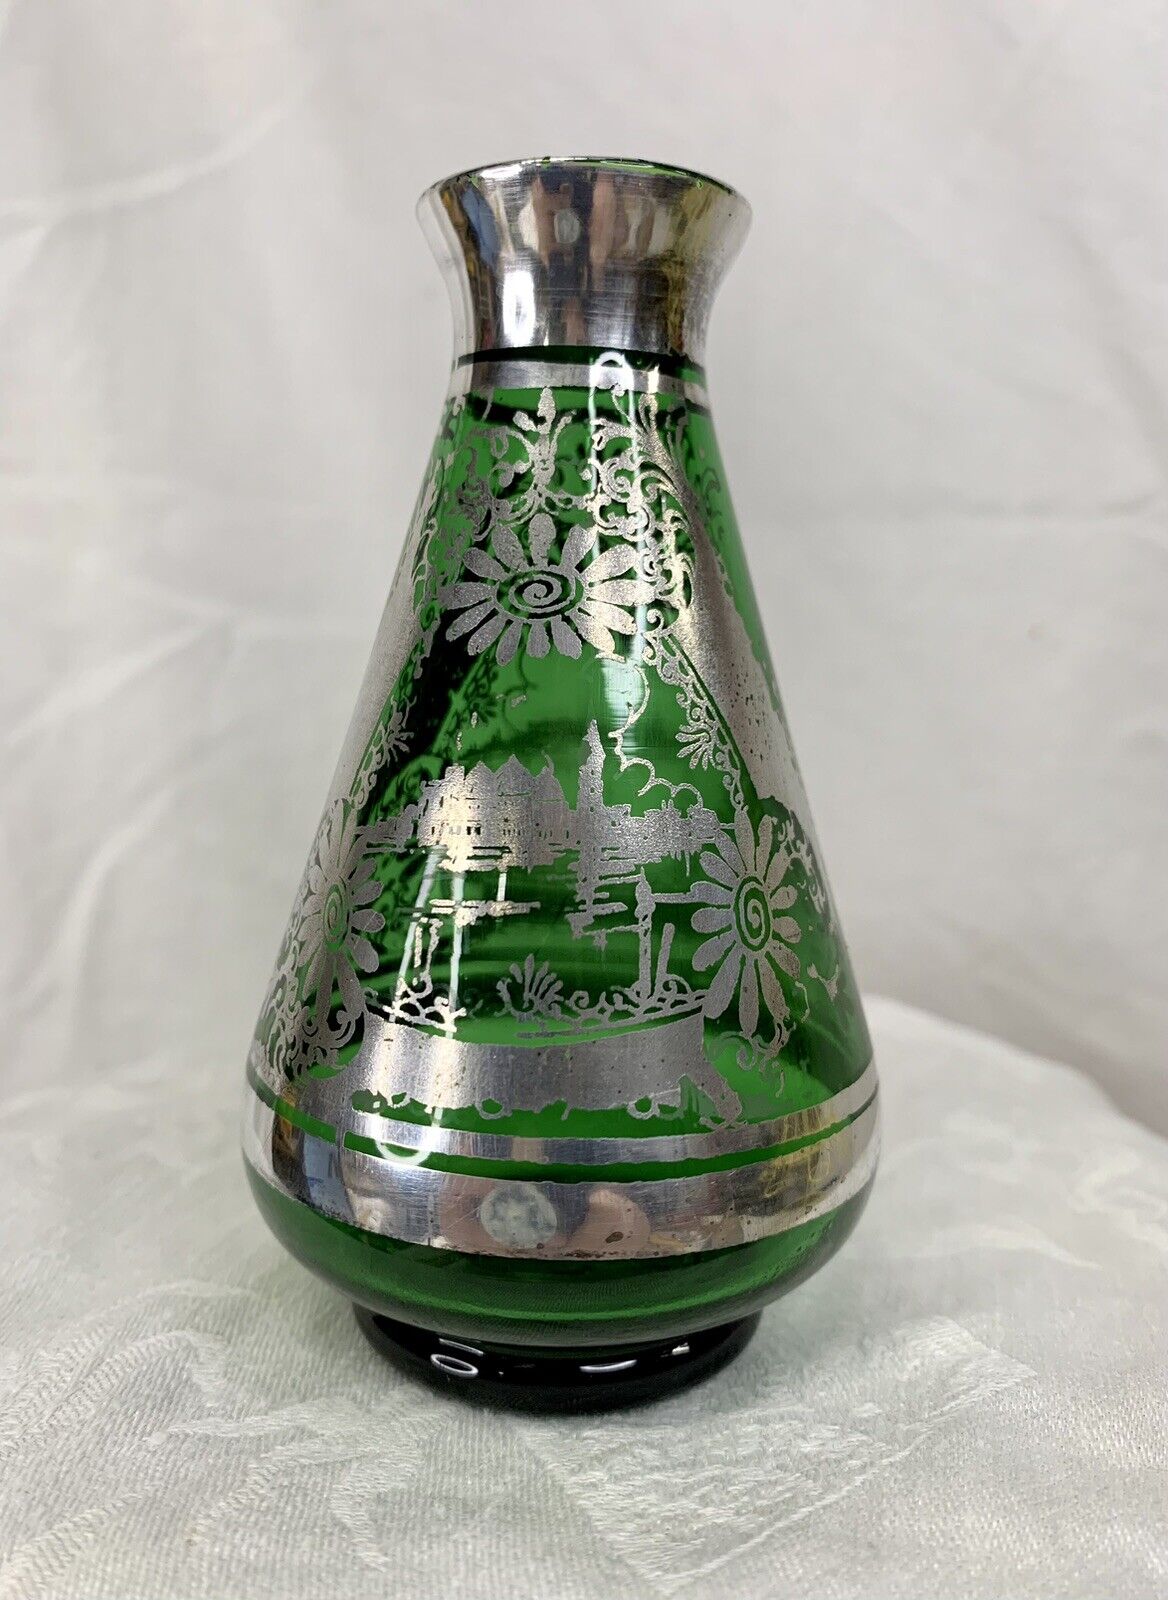 Green Glass Vase Silver Overlay Hand Painted Venice Scape 4 1/4”H Flowers